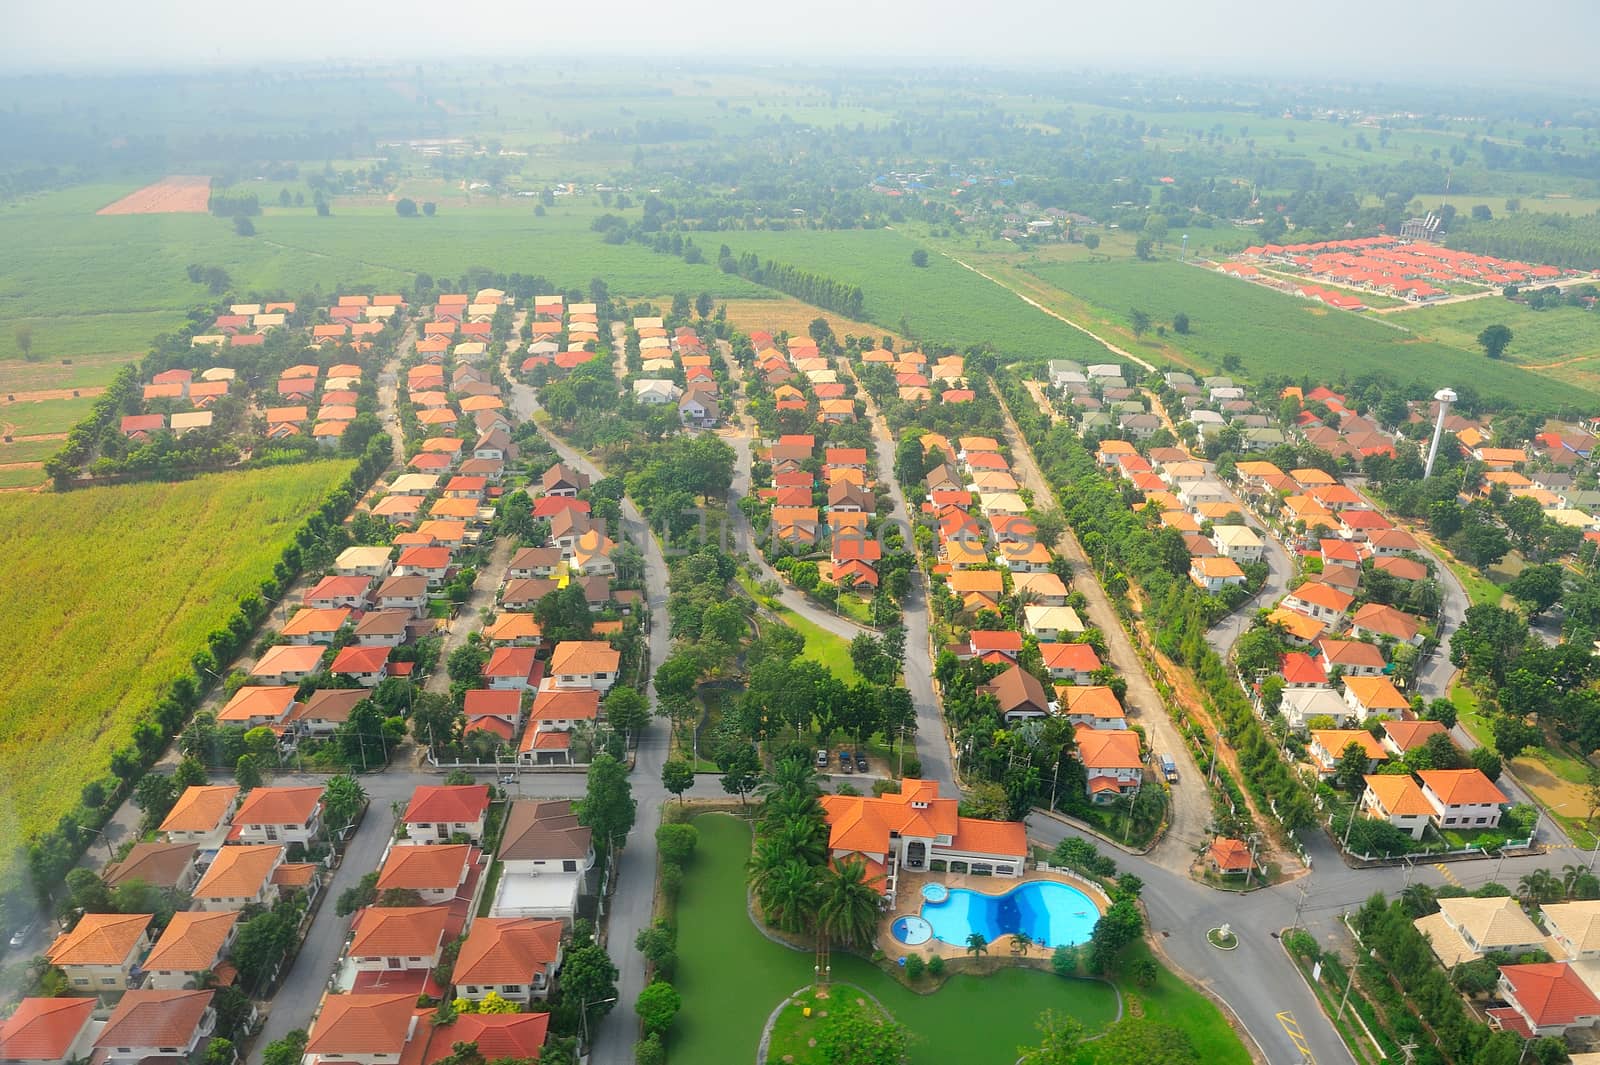 Aerial view of a village in Pathum Thani, Thailand by think4photop